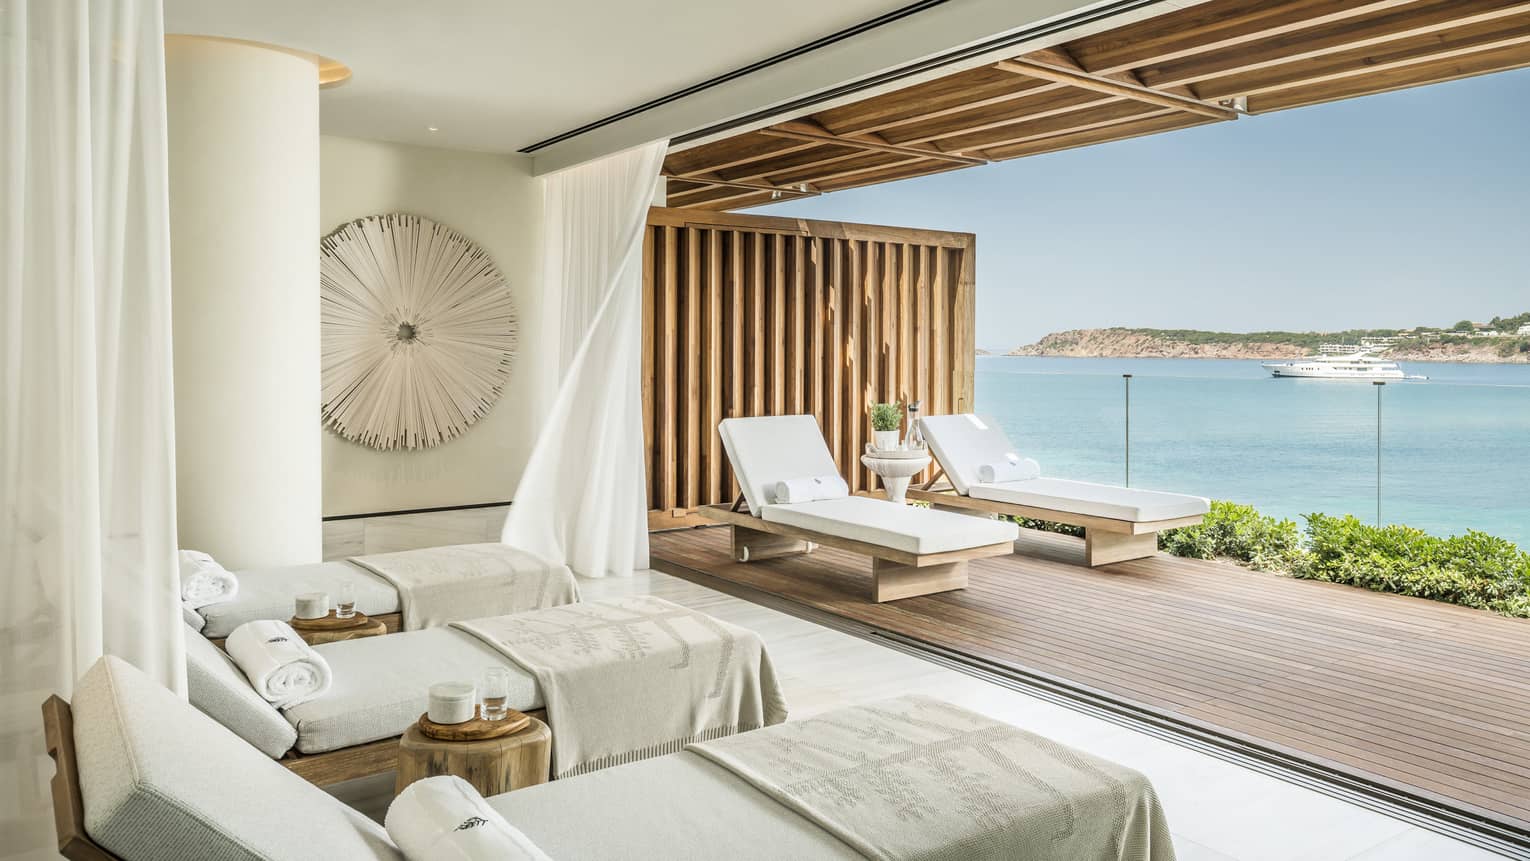 Ocean-facing spa treatment room with reclining treatment beds, towels, overlooking ocean and boat 